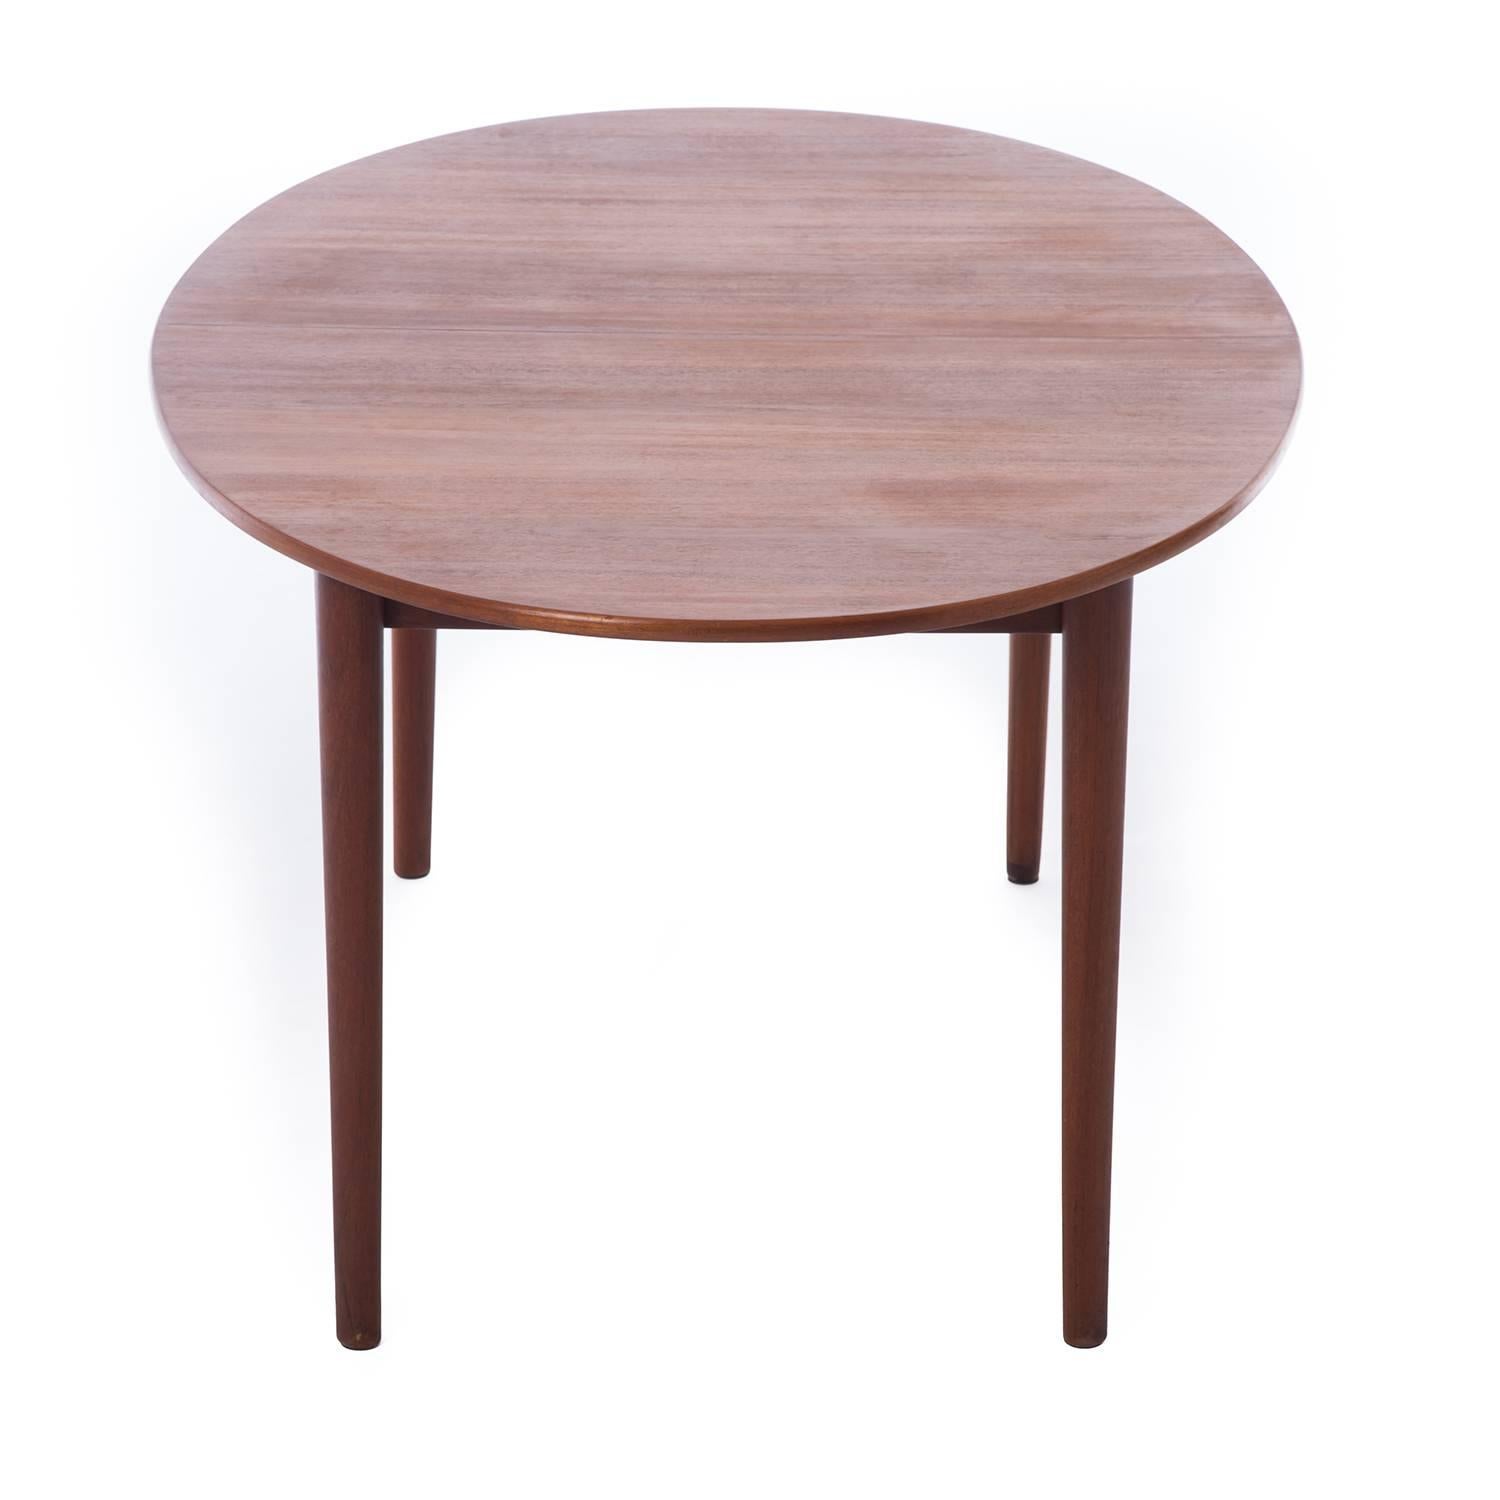 Danish Modern Oval Ellipse Dining Table with Two Leaves 1